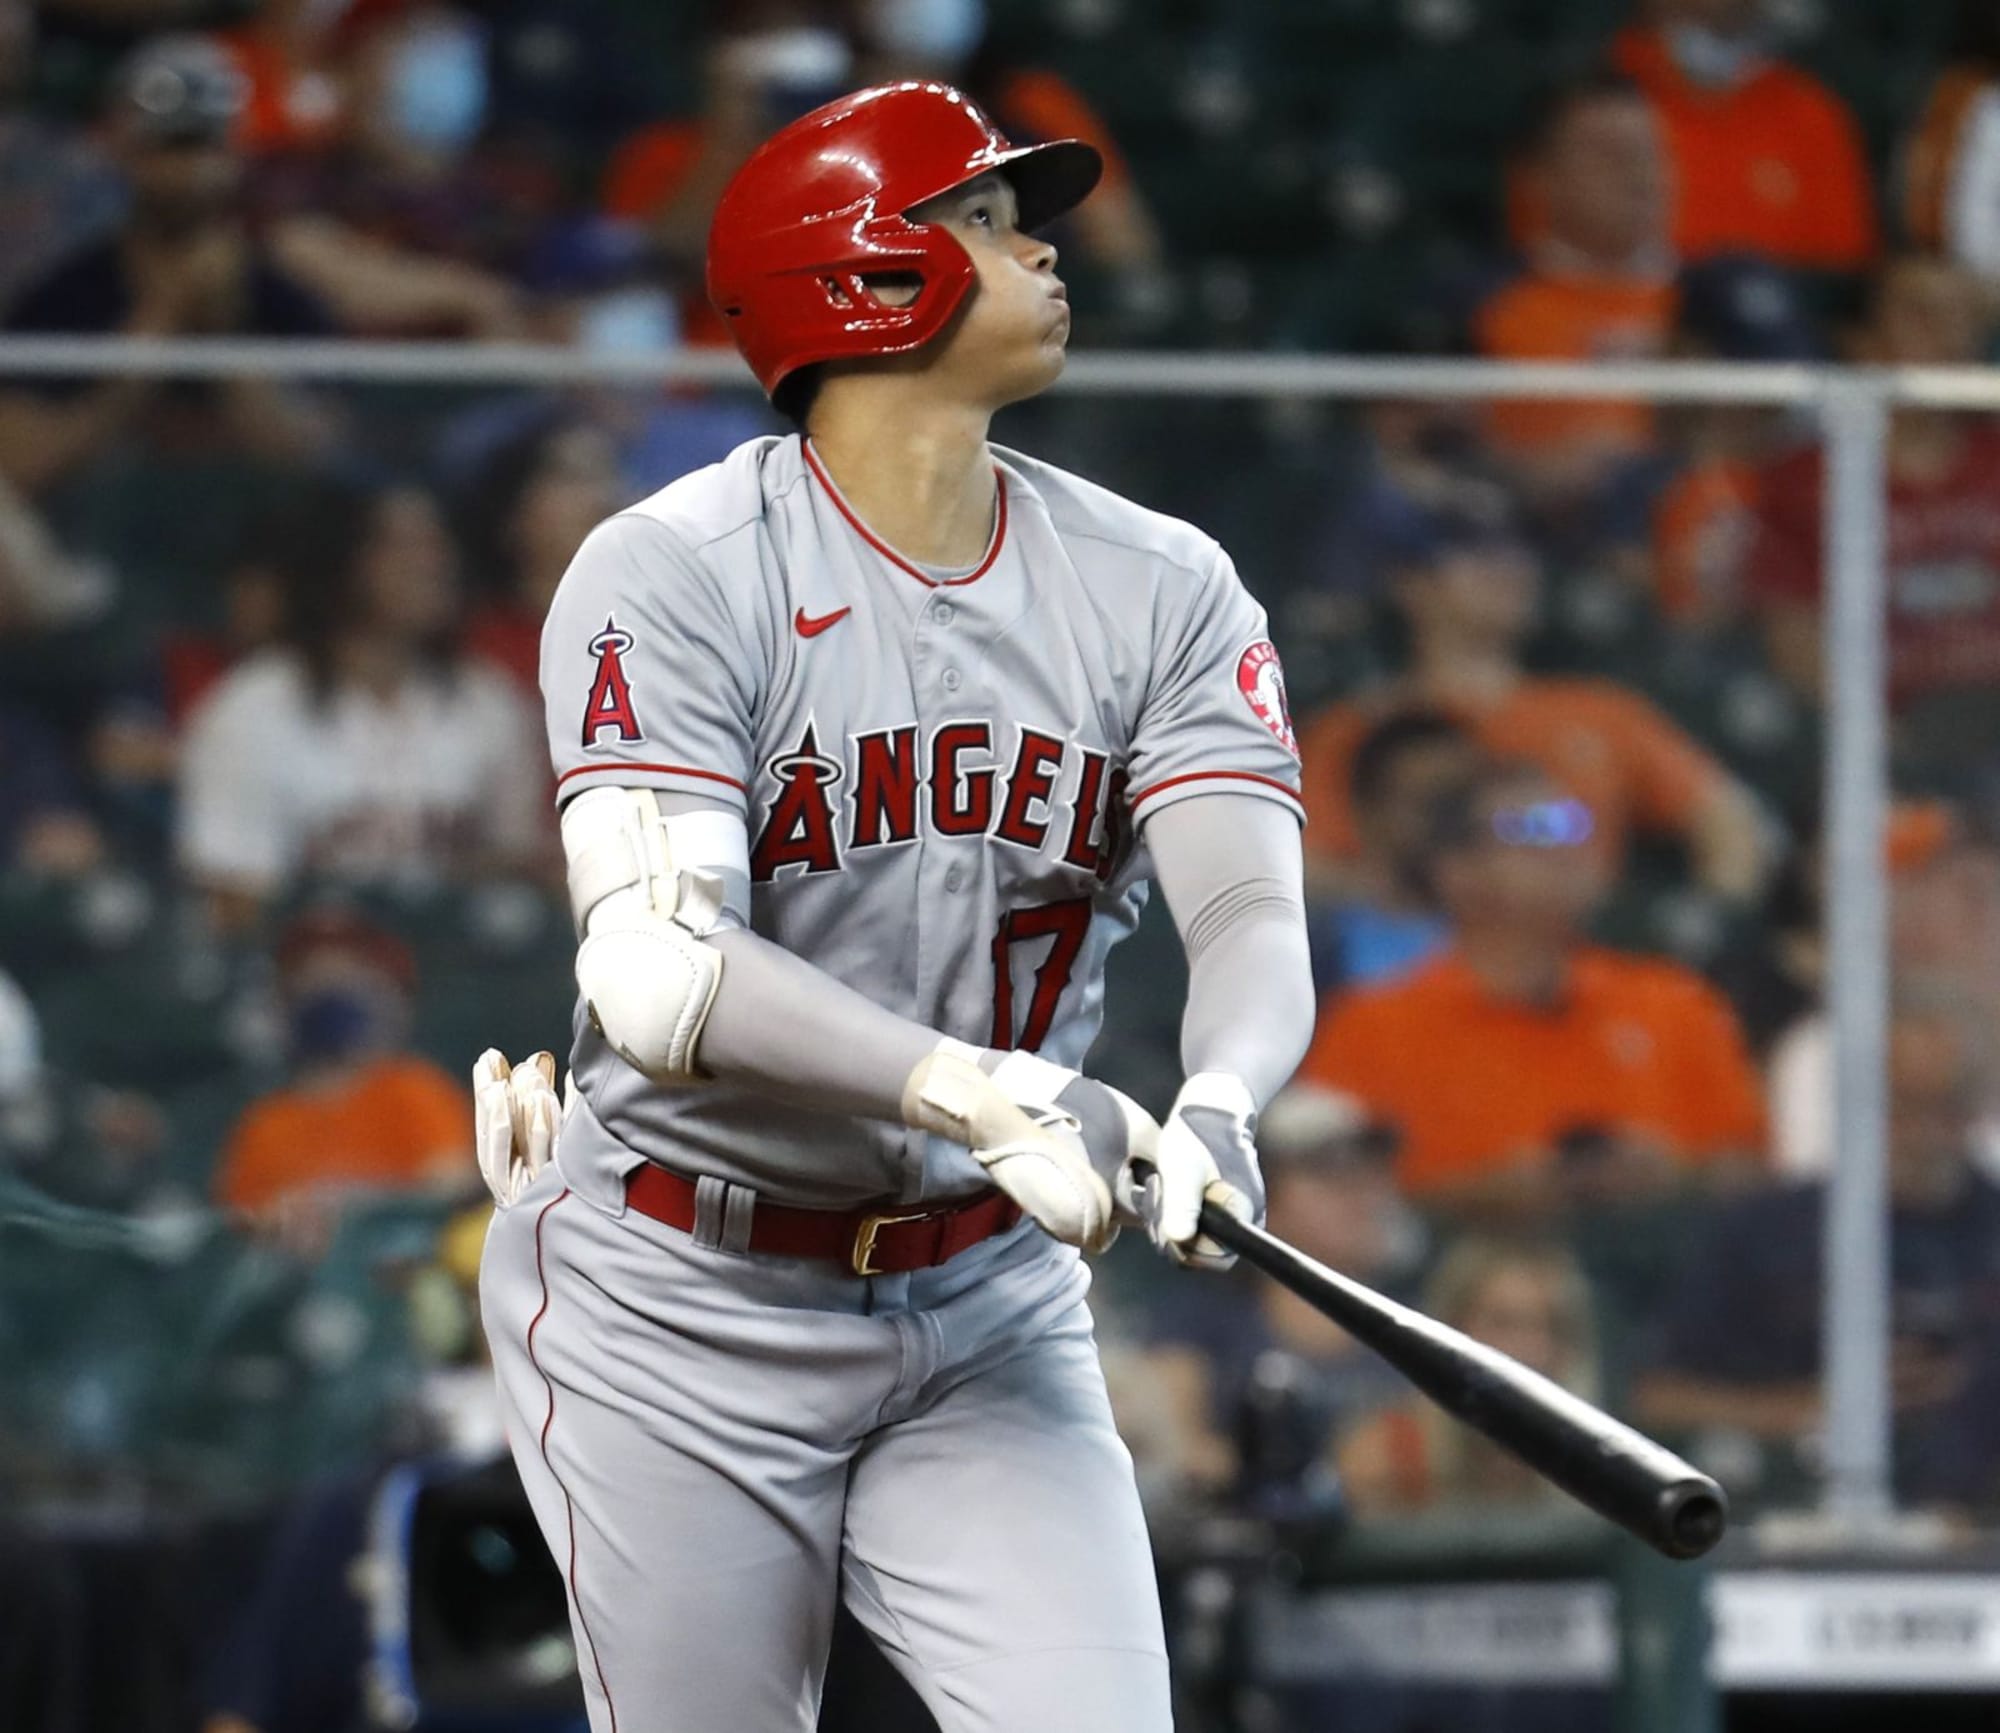 LA Angels: Shohei Ohtani shares history with Babe Ruth for this record